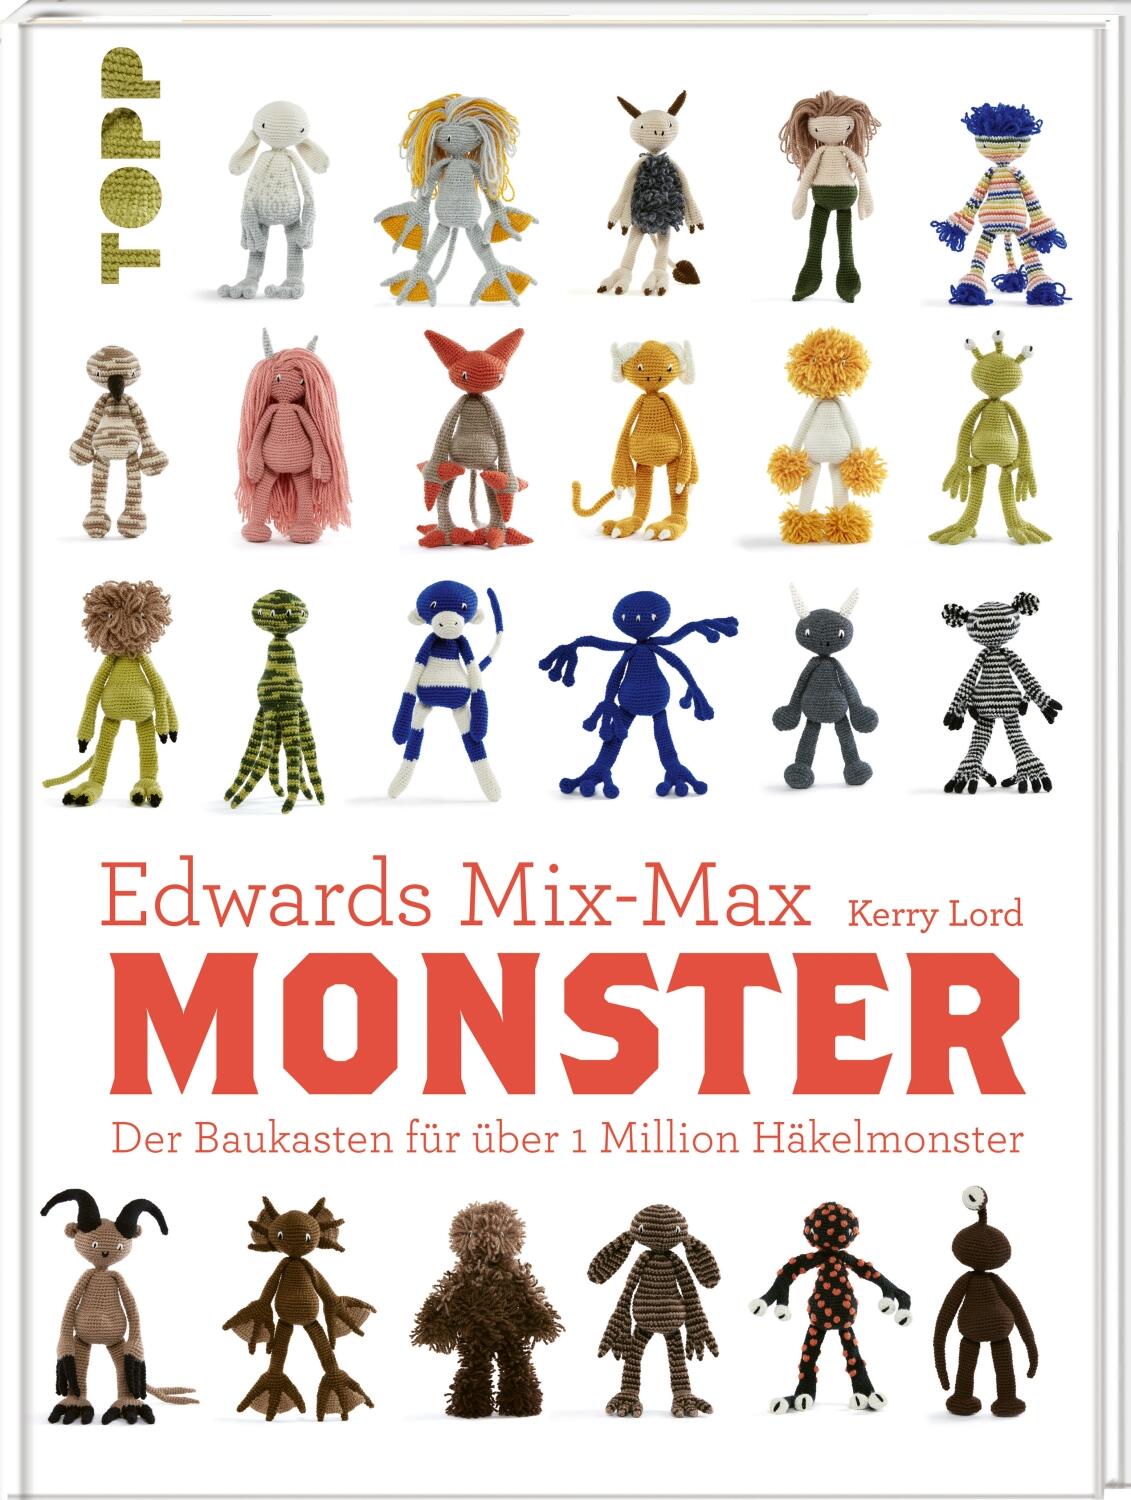 Edwards Mix-Max Monster von Kerry Lord